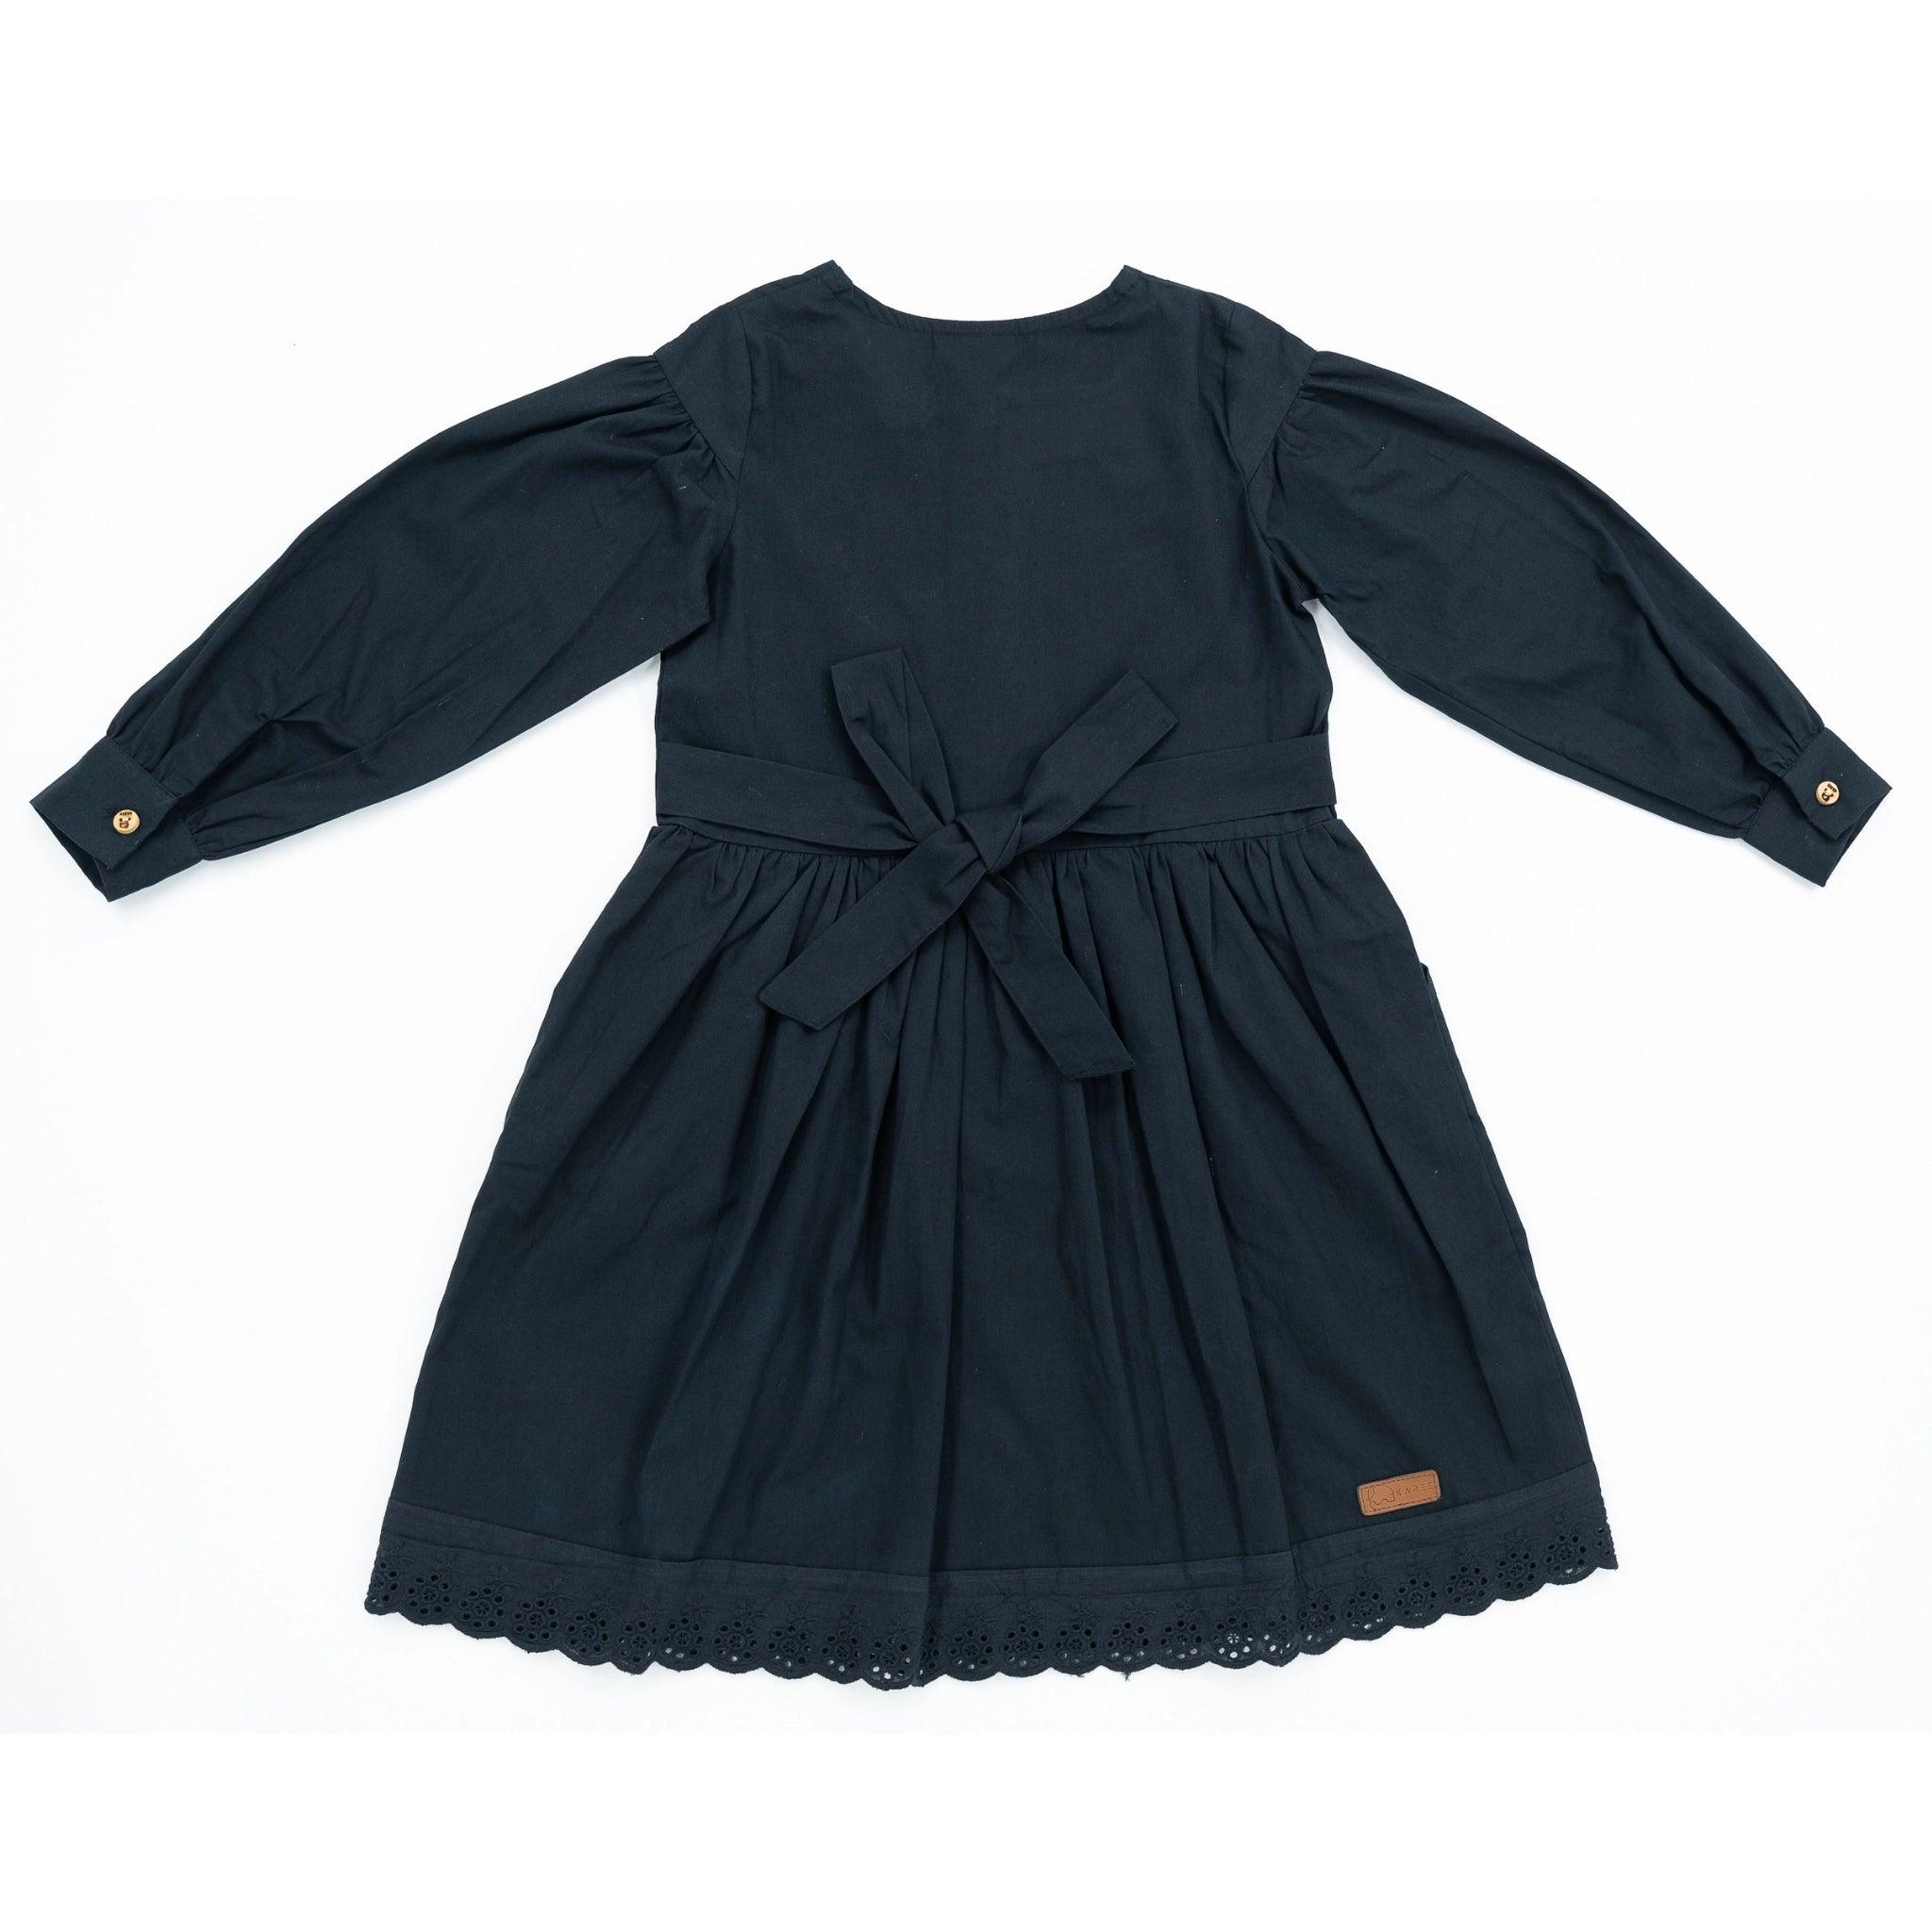 Black long-sleeve dress with a waist tie and lace trim at the hem, featuring long puff sleeves, against a white background - Karee Black Long Puff Sleeve Cotton Dress.